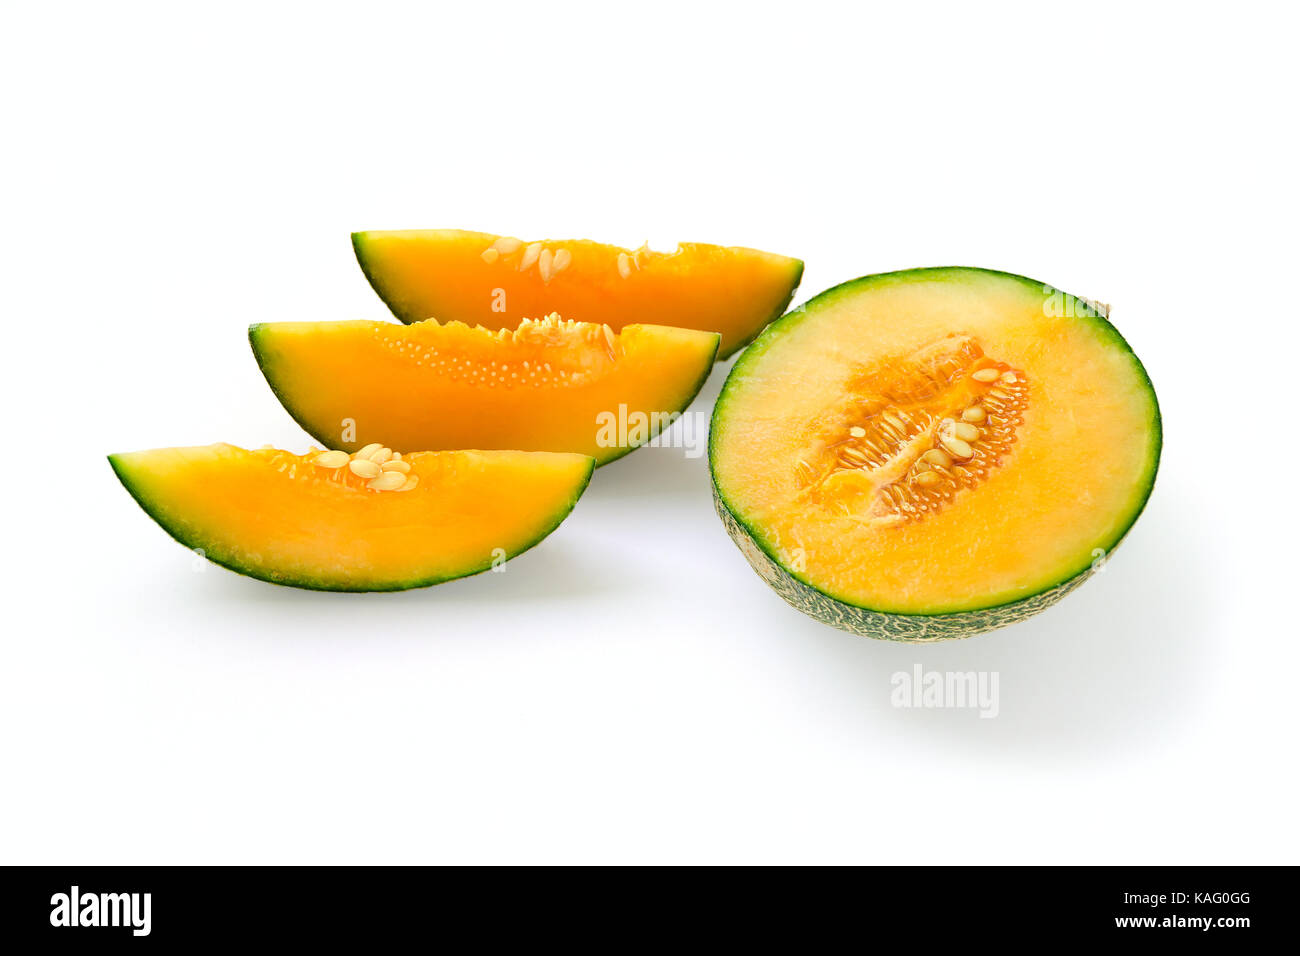 Cut halved ripe melon yellow inside, green outside. Near the cut slices with seeds. Isolate on white background. Stock Photo